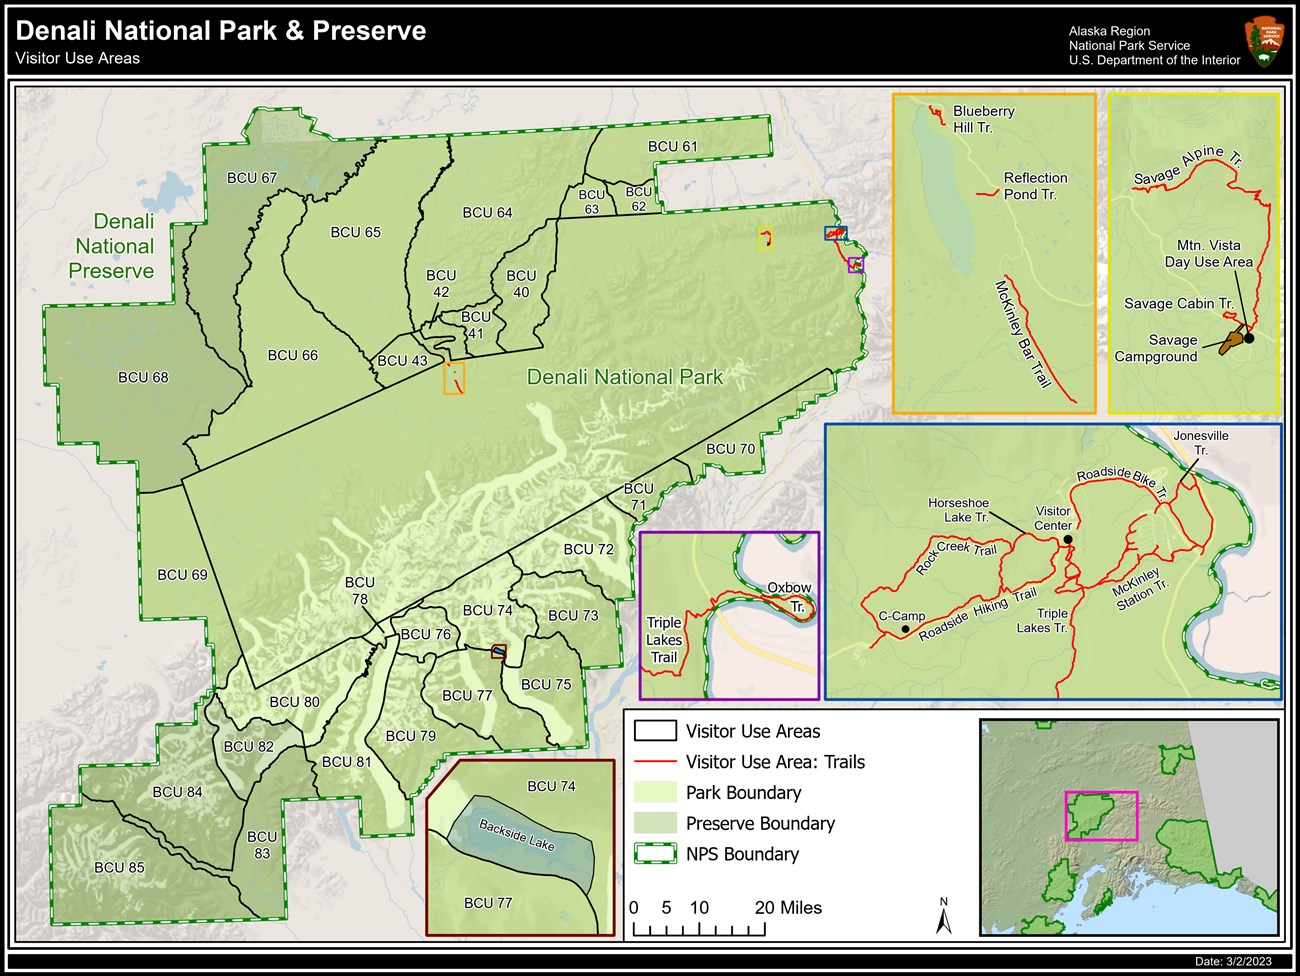 Denali National Park and Preserve Visitor Use Area Map